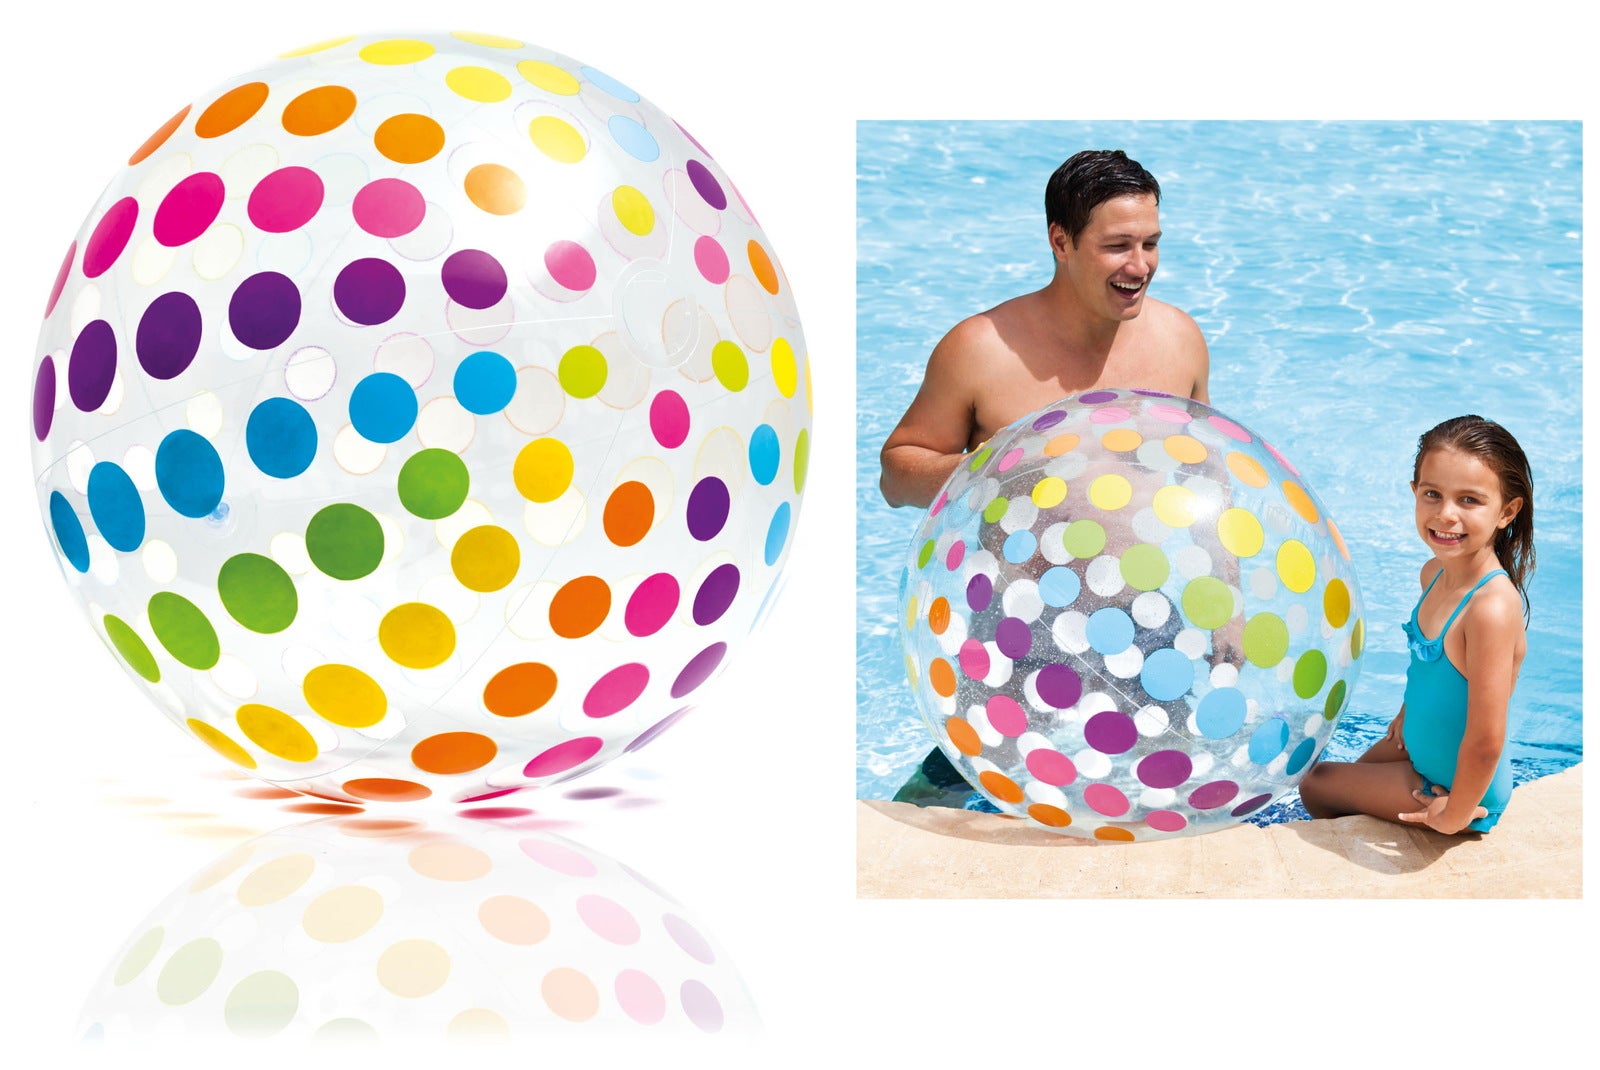 Pack Of 12 16 Inch Beach Balls For Sports Pool Bedwina Inflatable Basketballs 